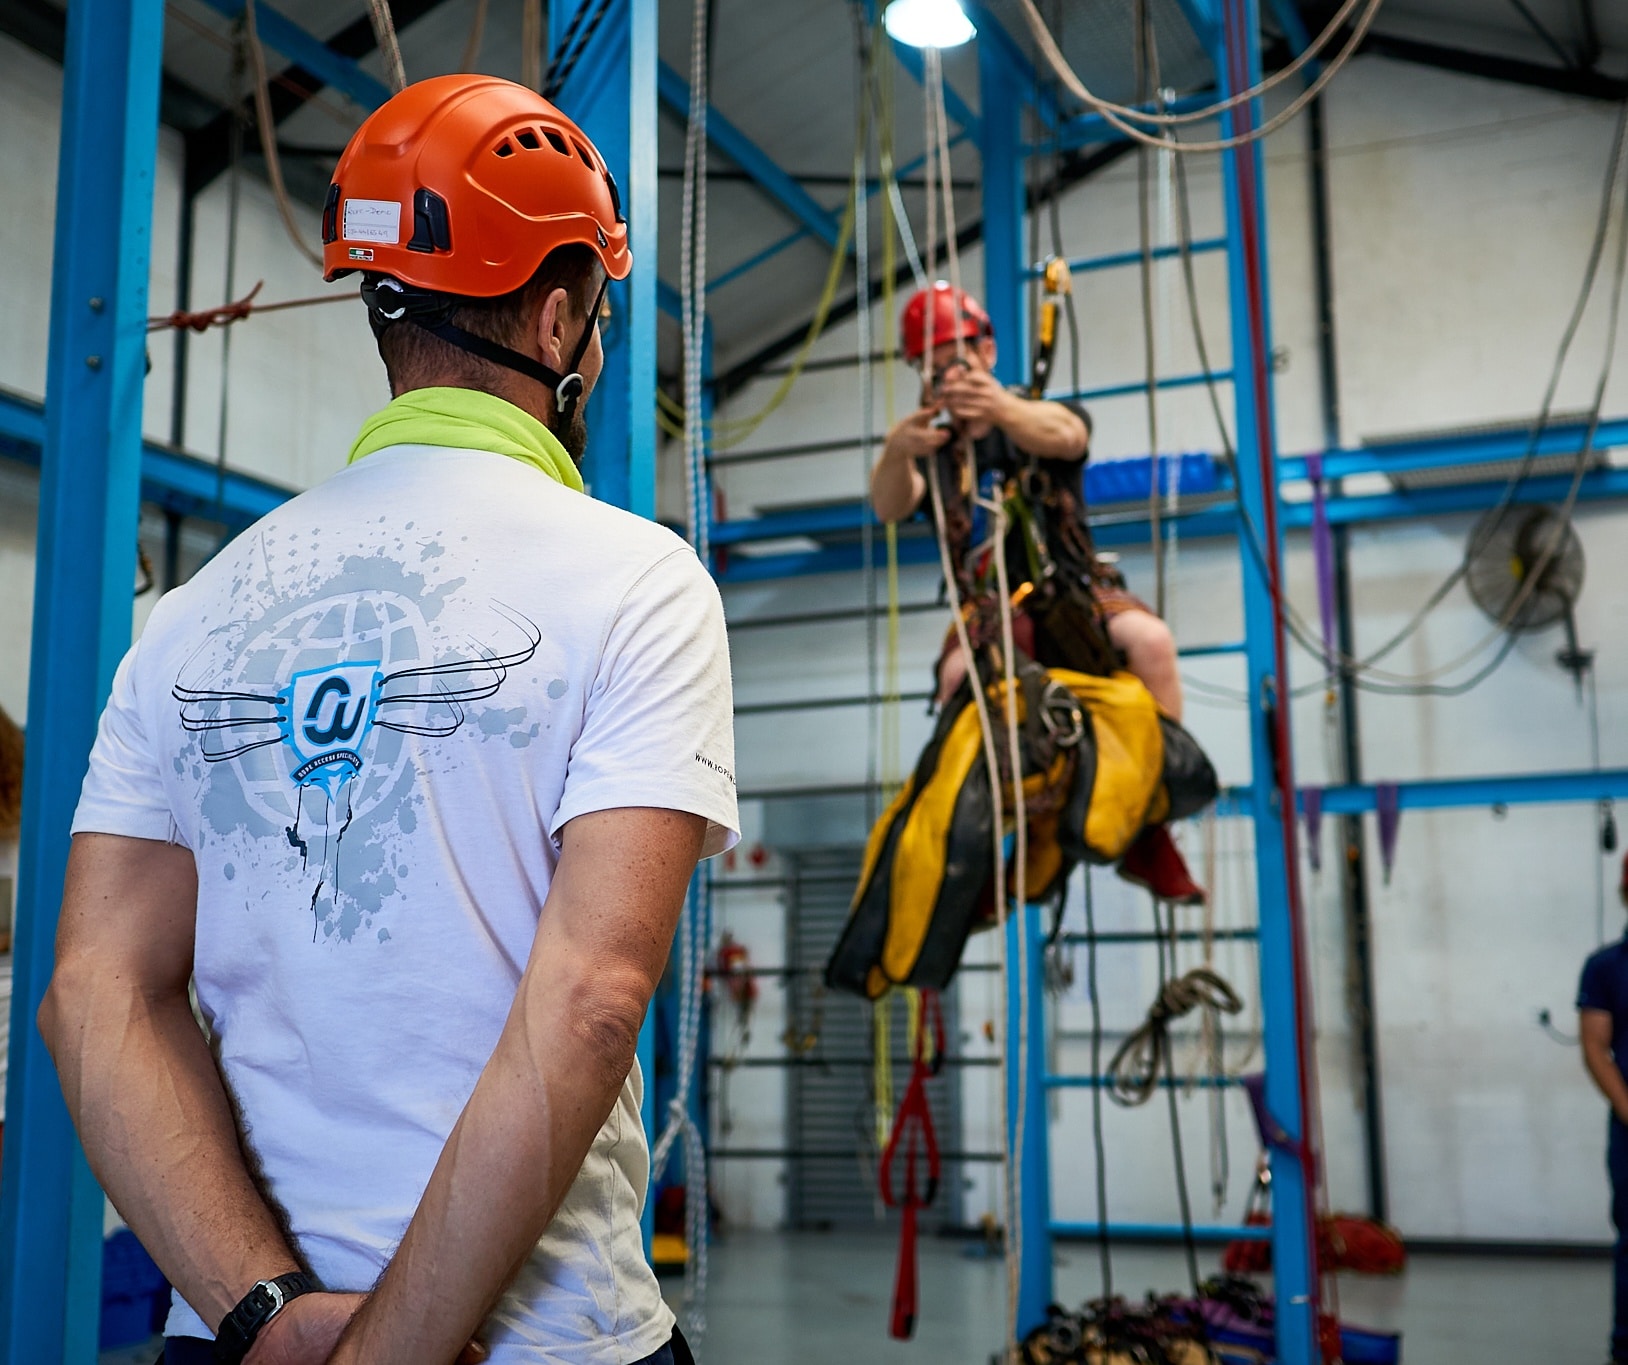 rope access training revalidation cape town